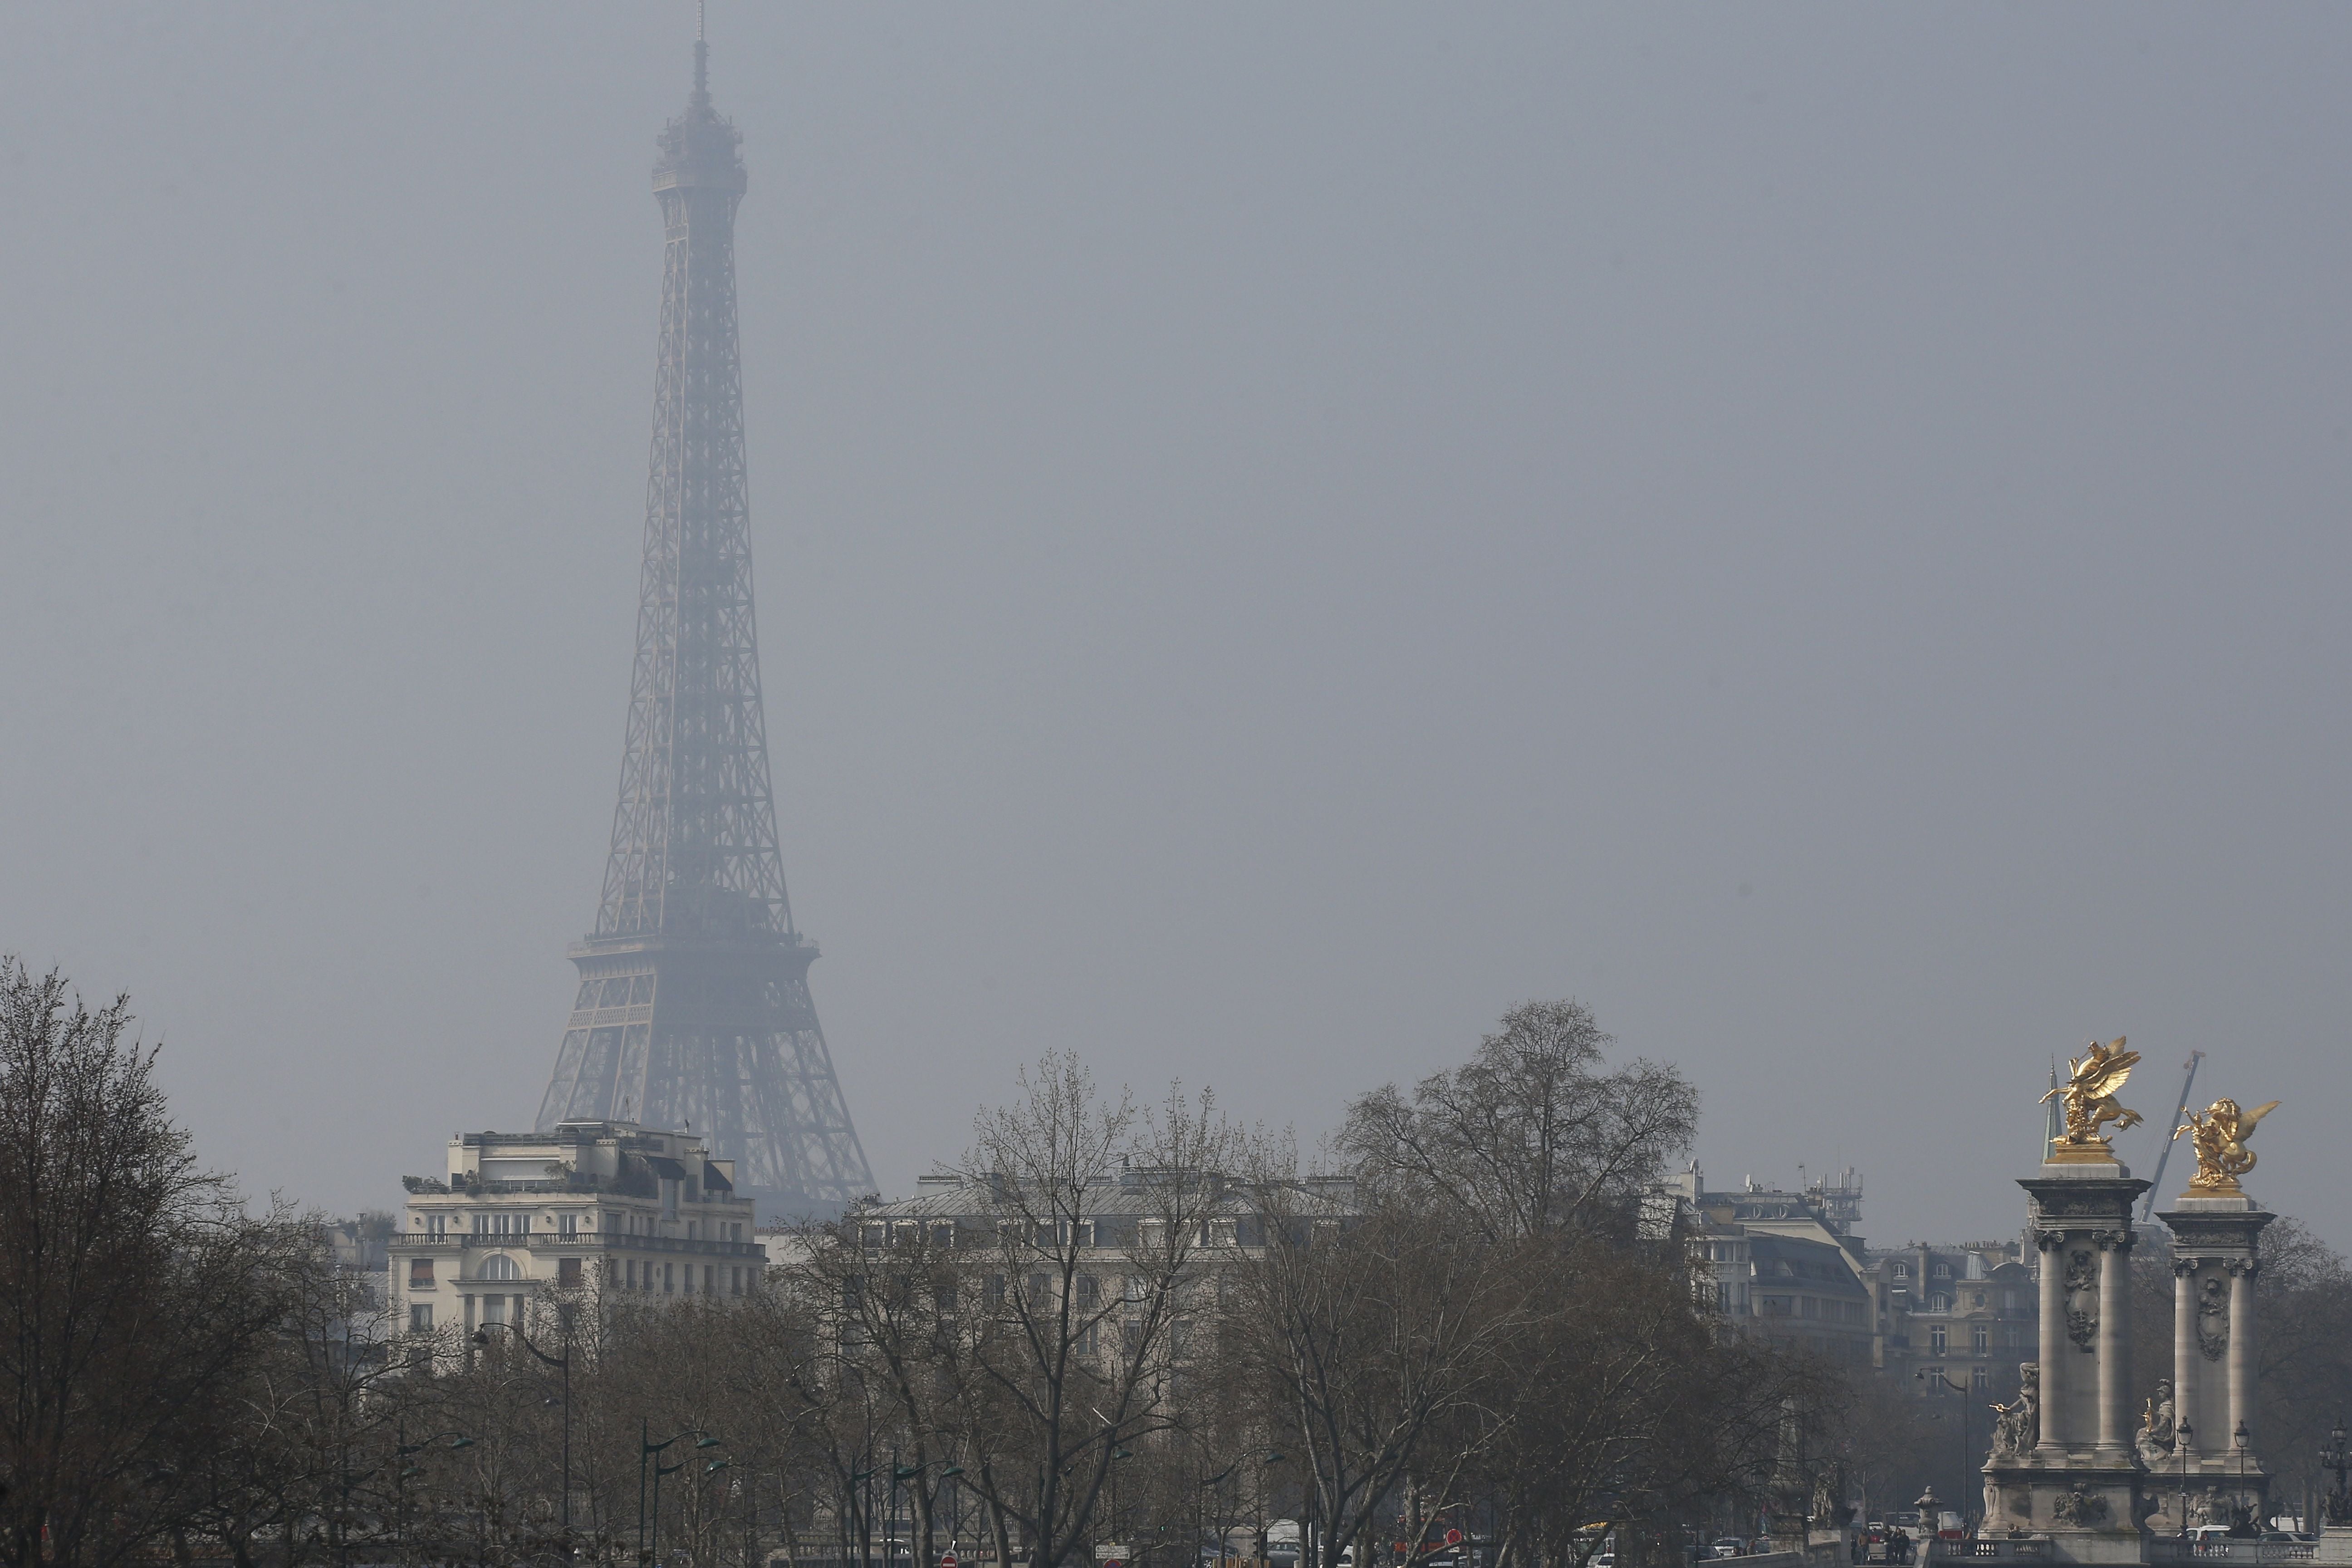 Paris has made public transport free in the past when pollution levels are especially high